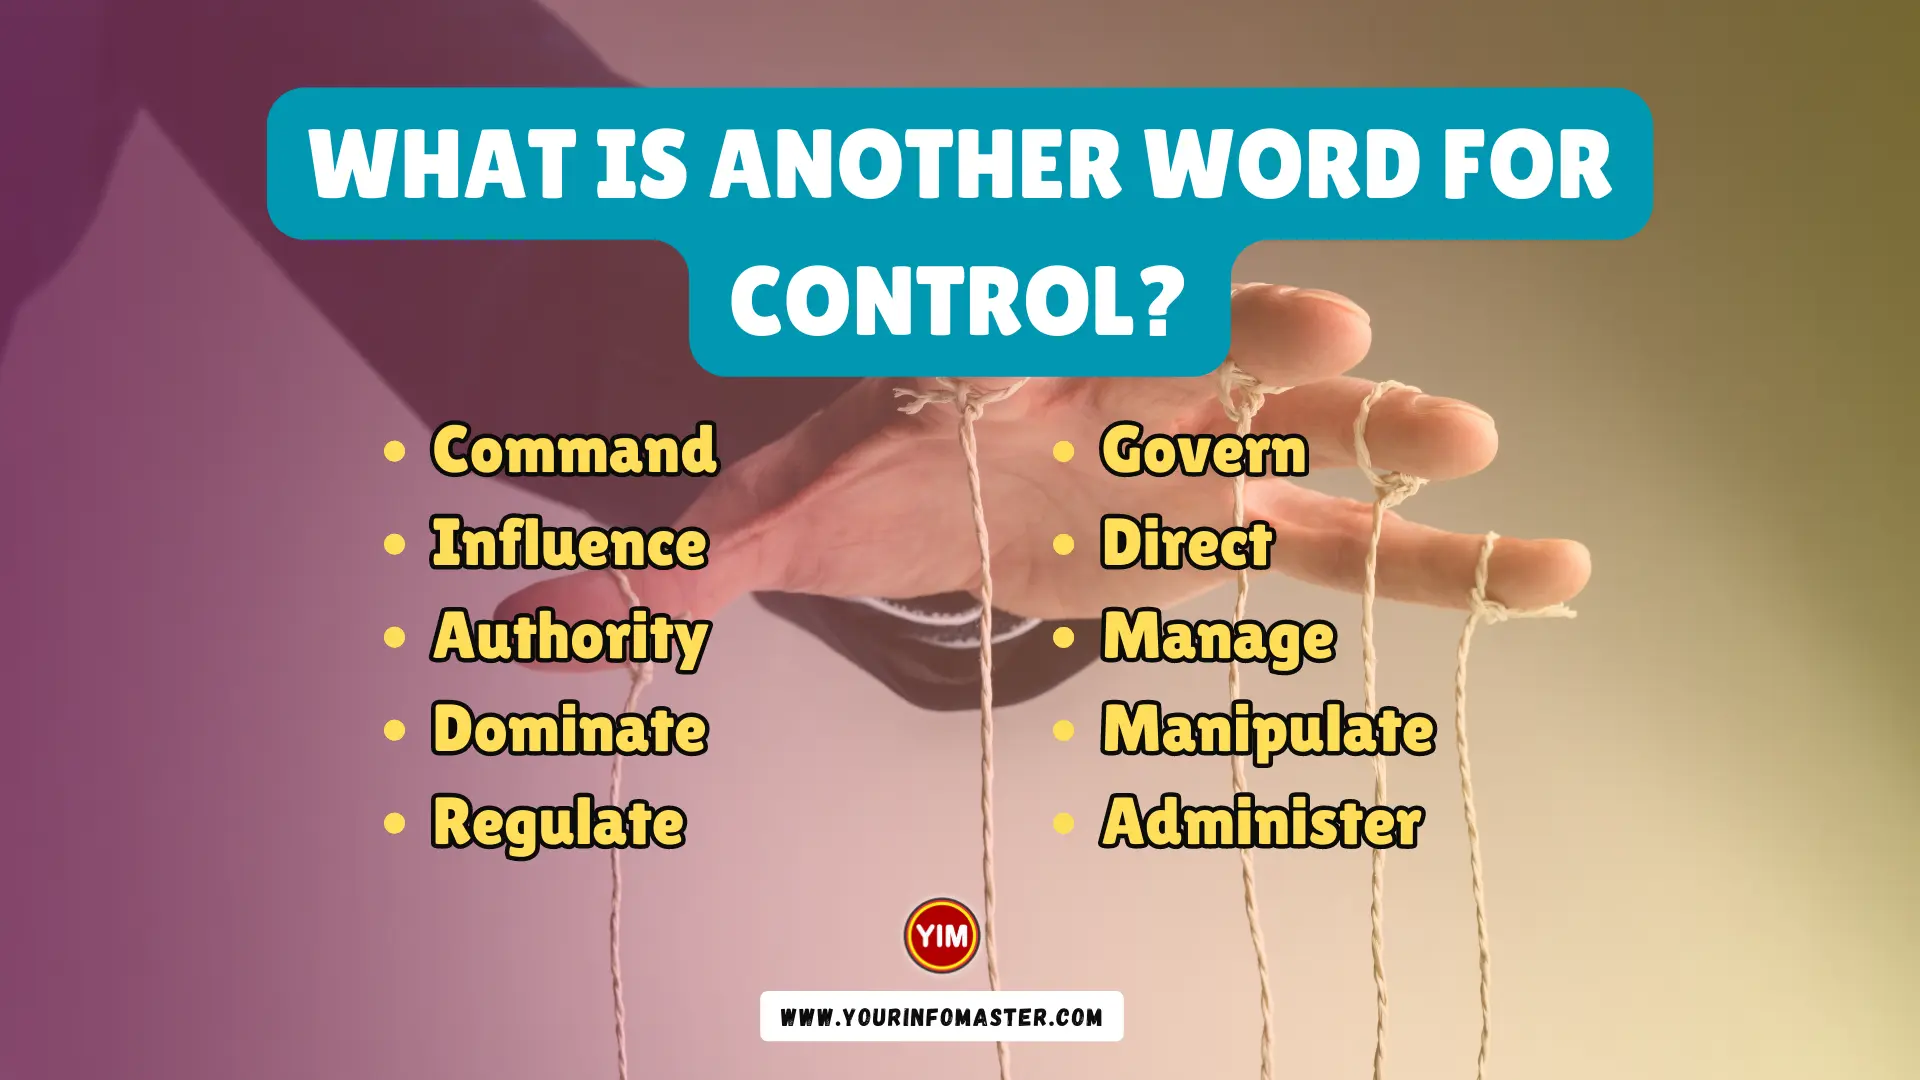 What is another word for Control